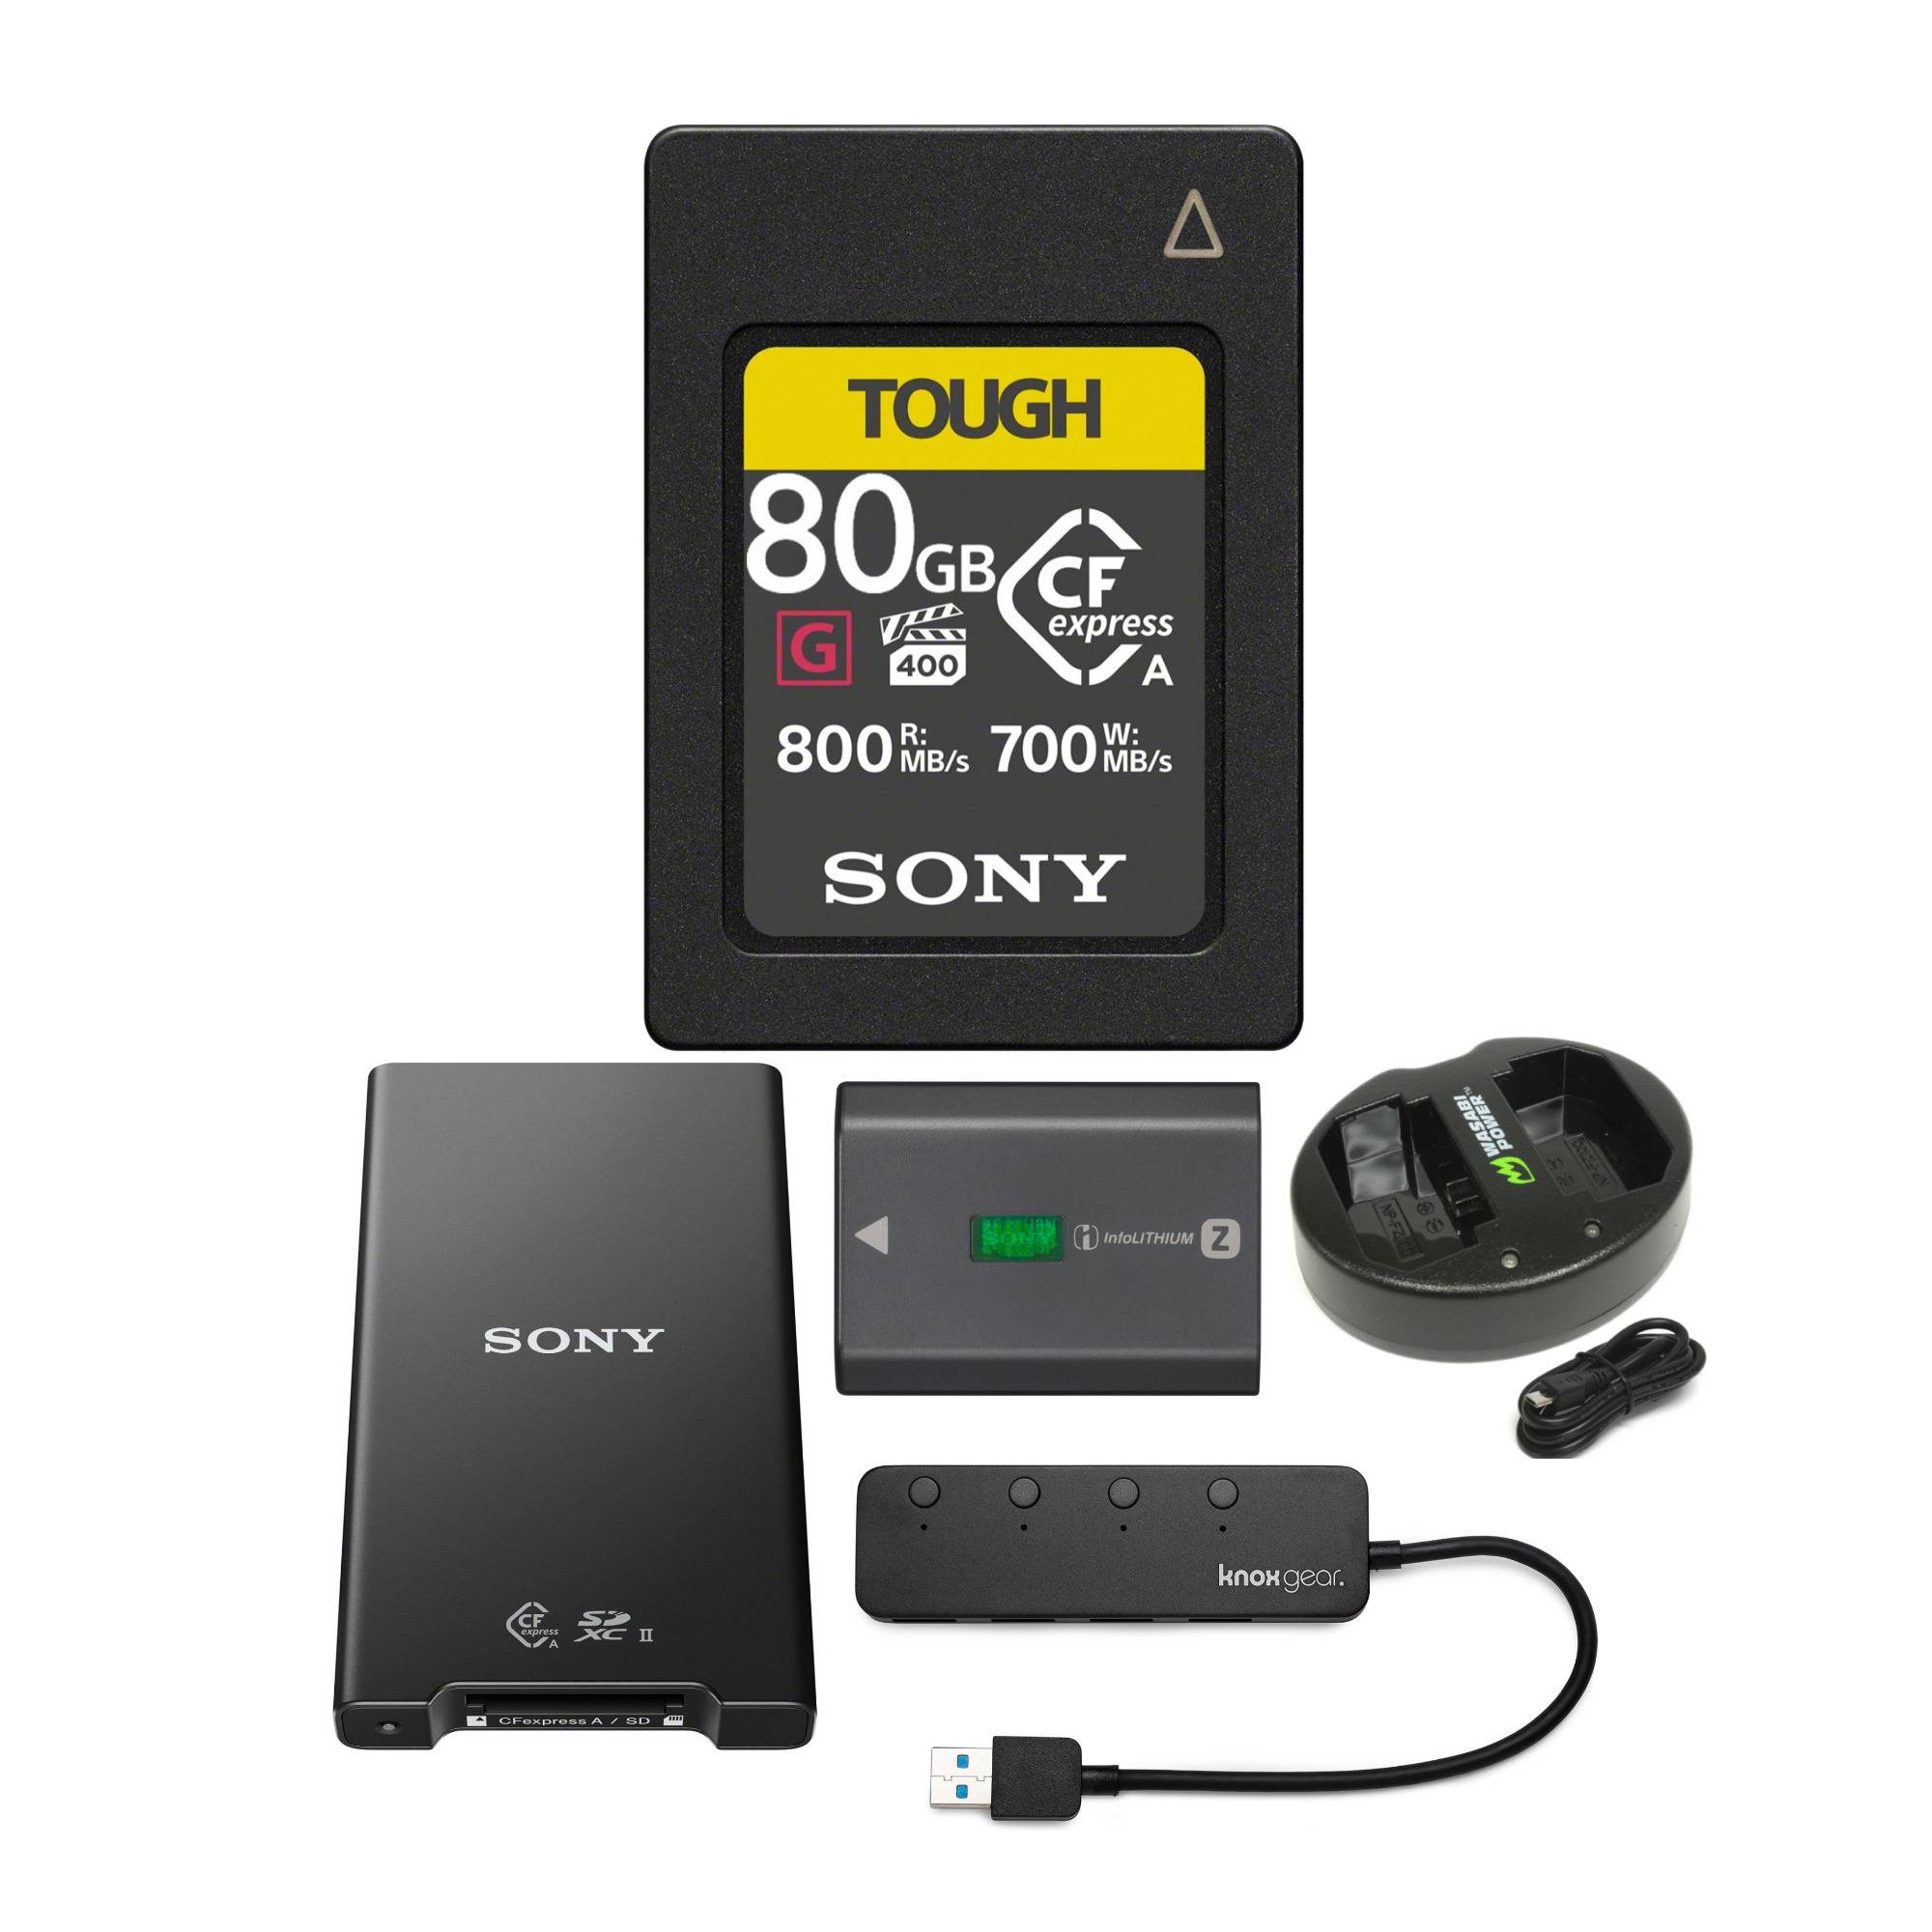 Sony CFexpress Type A 80GB Memory Card with Card Reader, USB Hub, Z-Series Battery Pack Bundle